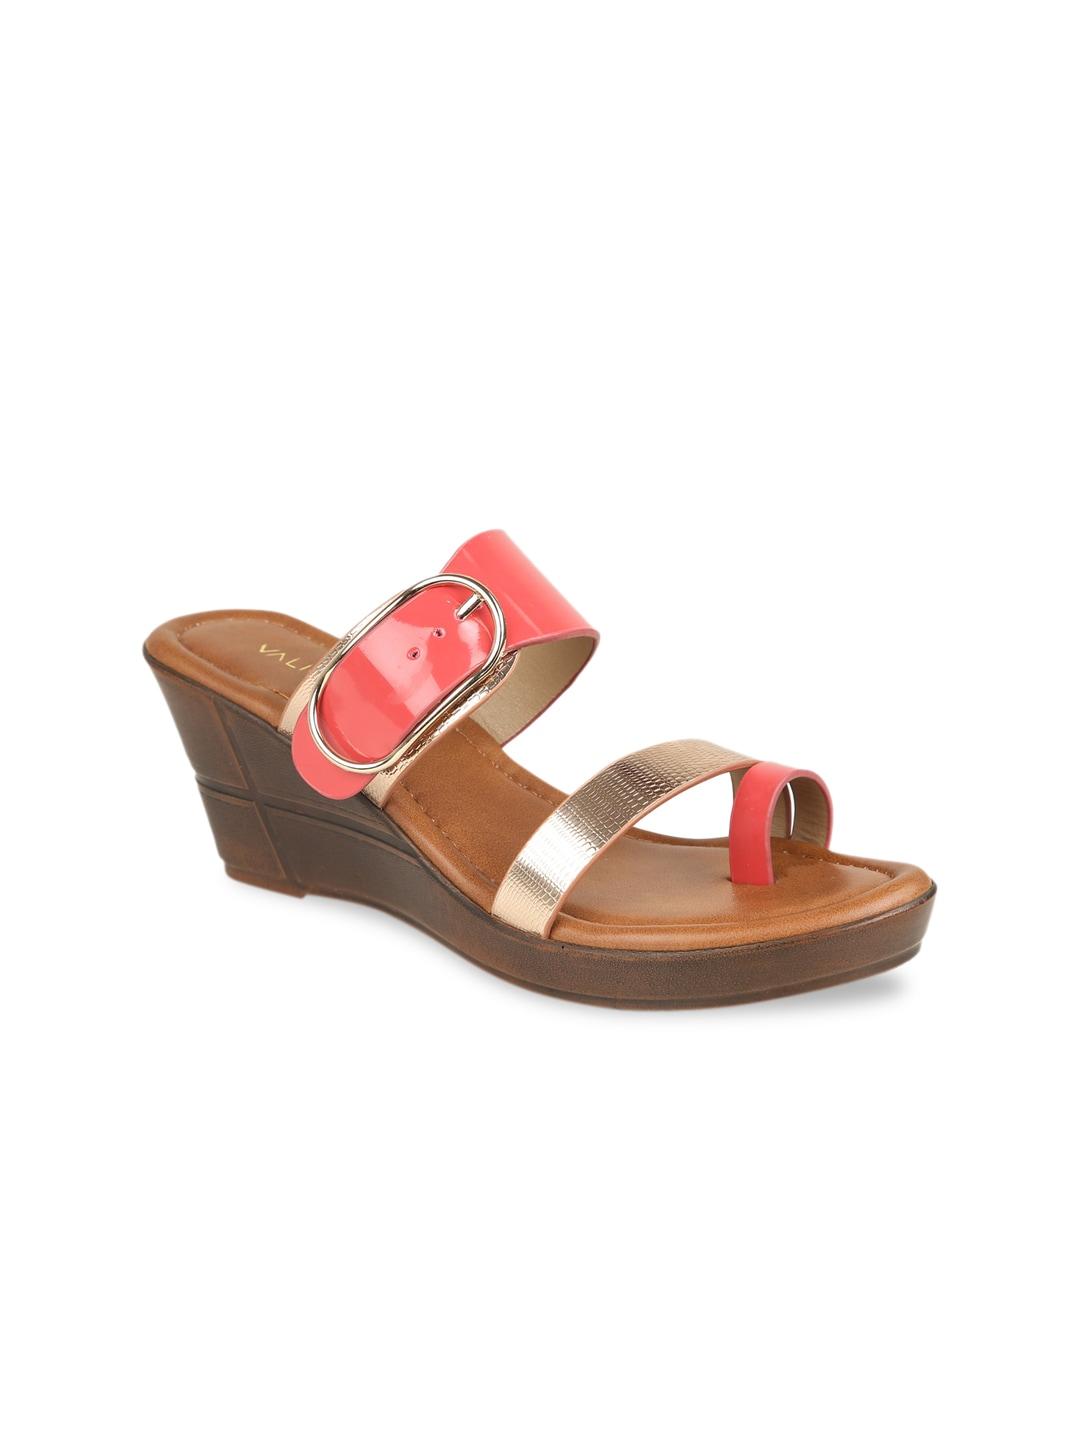 valiosaa coral red & gold-toned colourblocked wedge heels